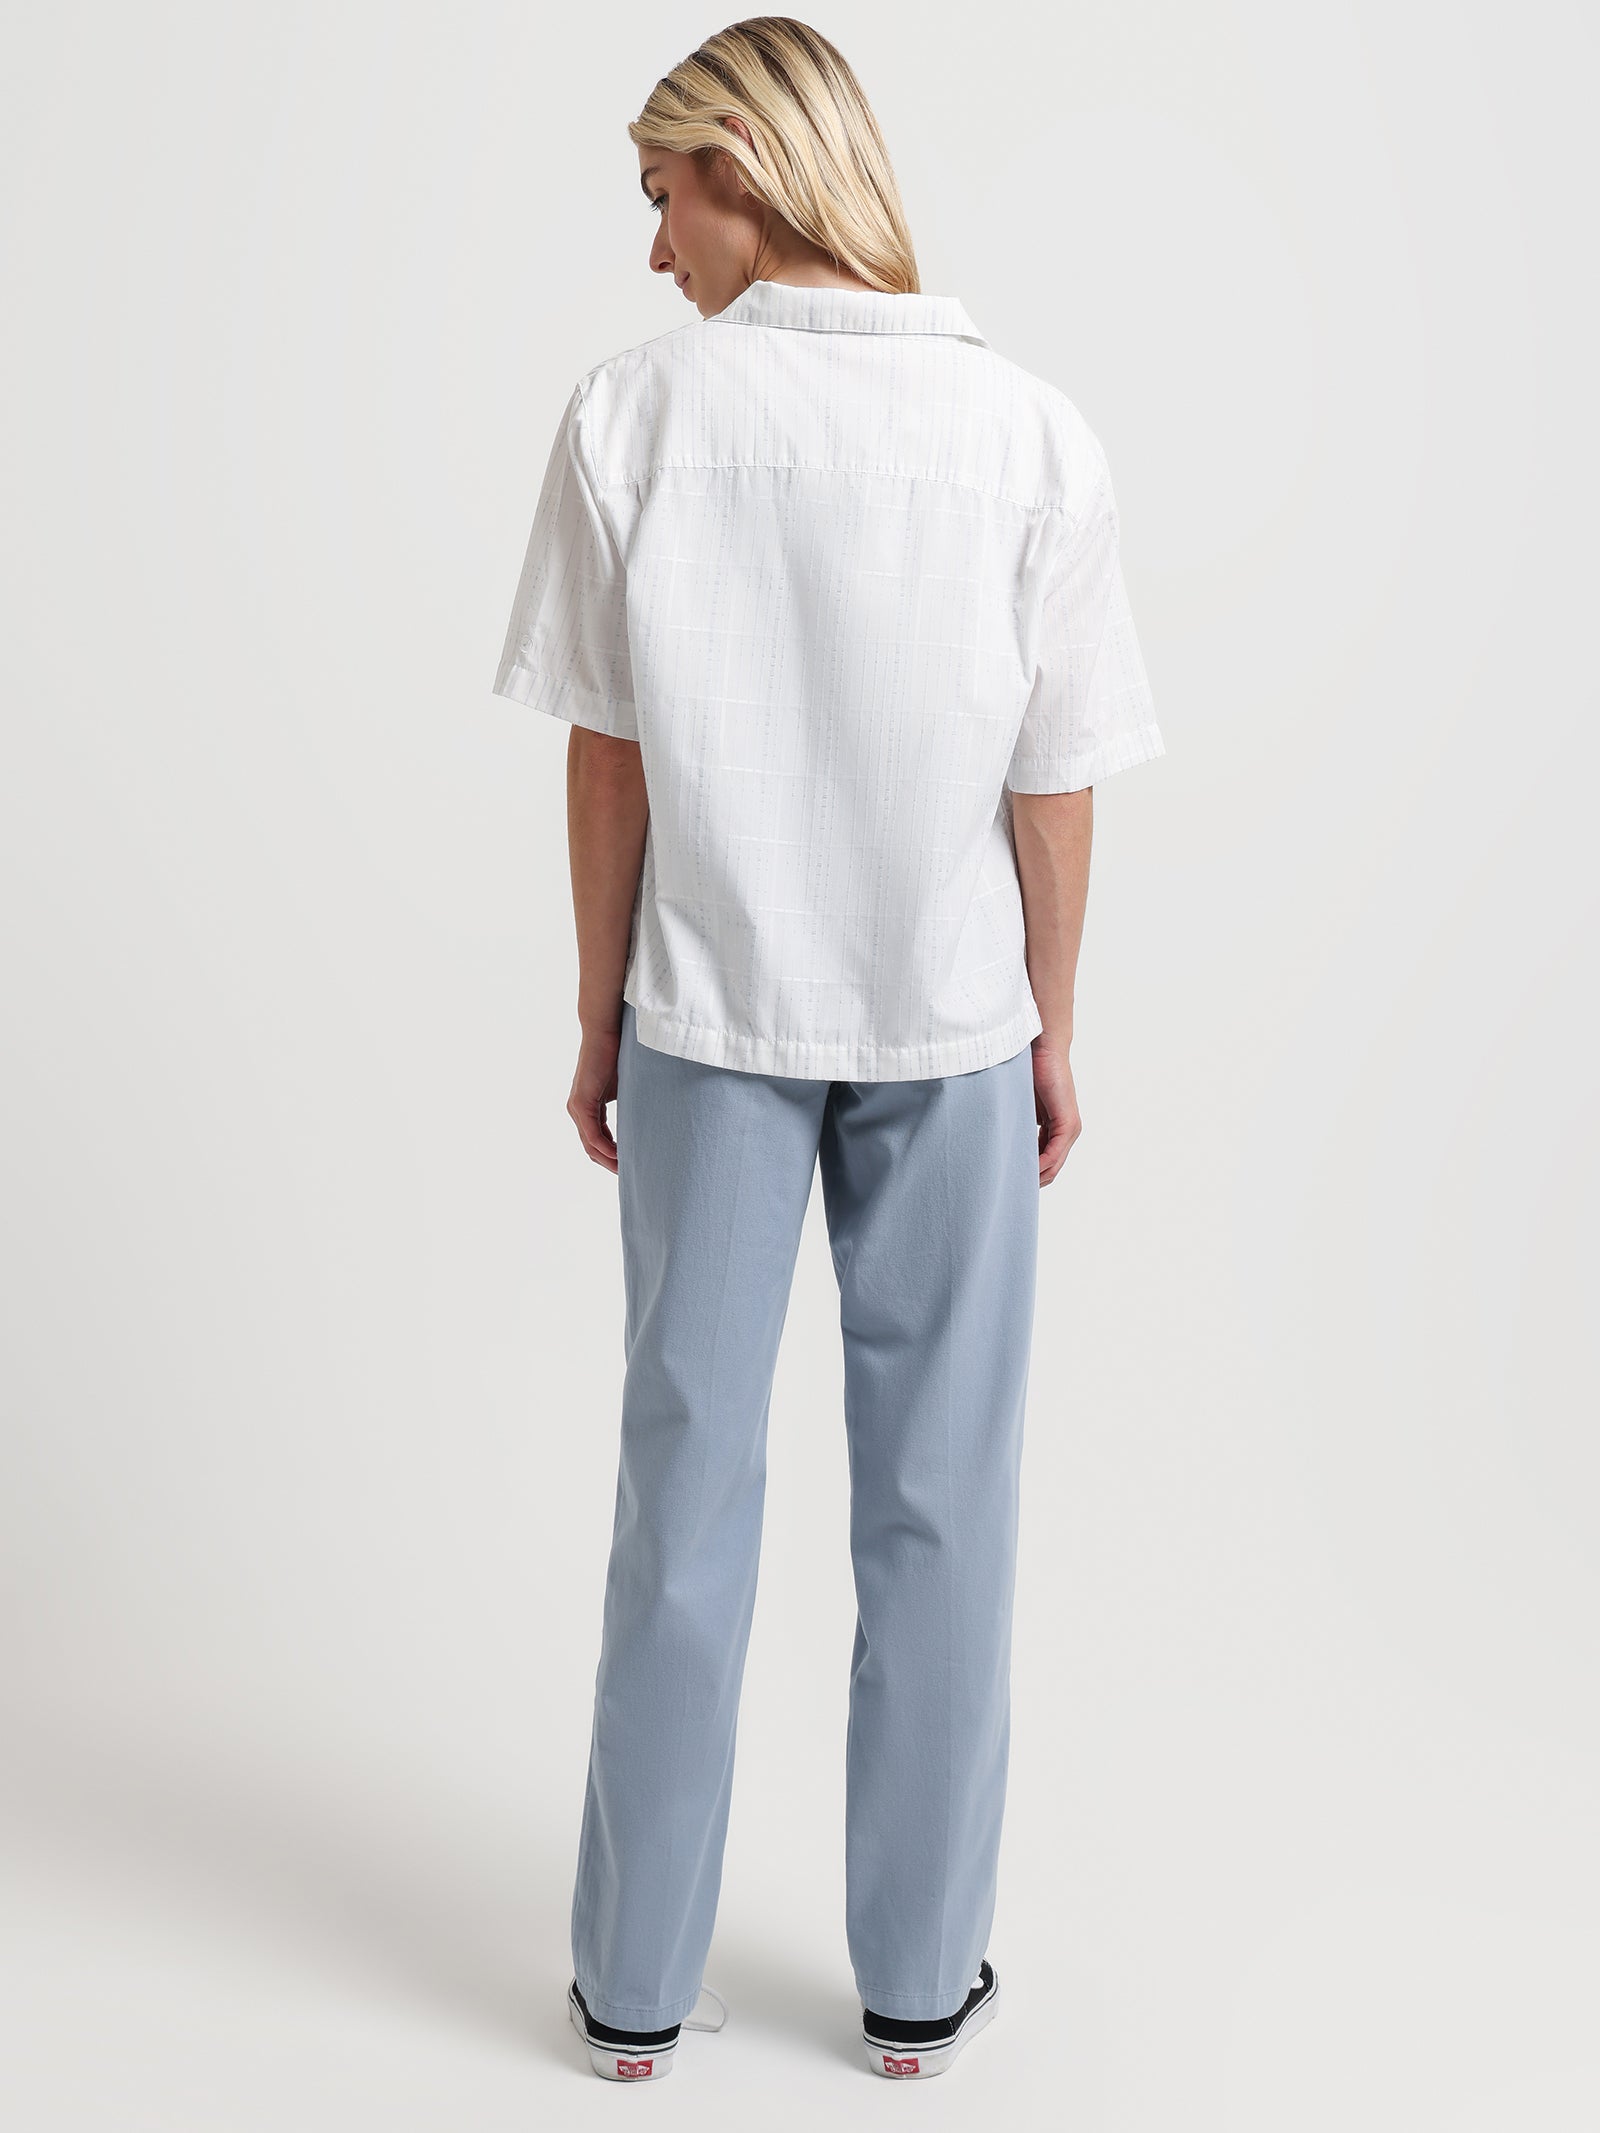 875 Tapered Fit Pants in Blue